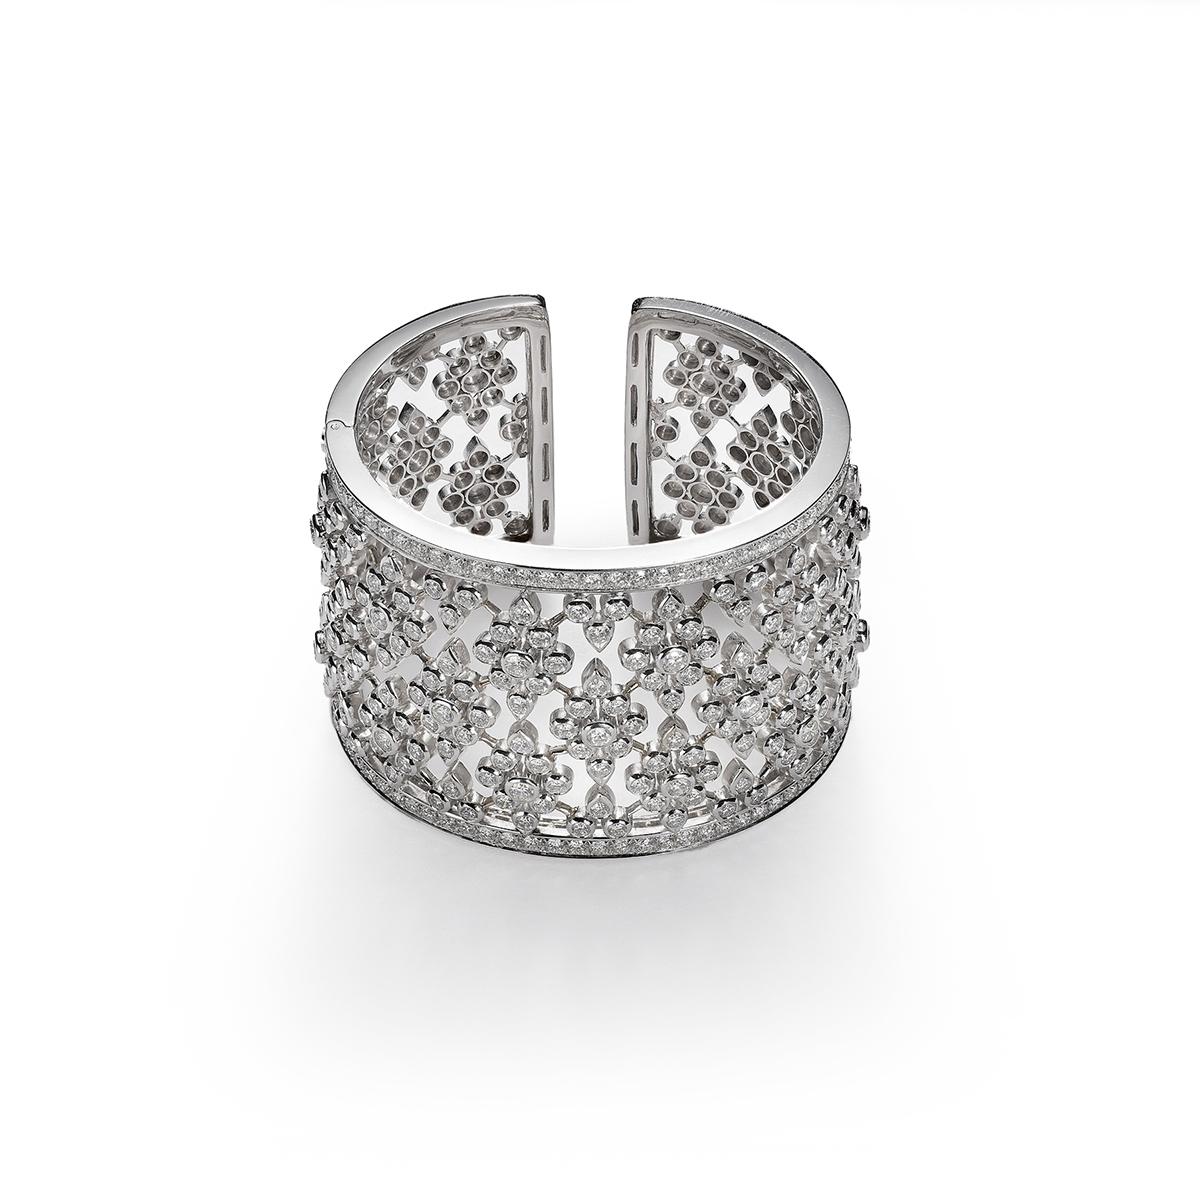 Bangle in 18kt white gold set with 262 diamonds 9.51 cts, 23 marquise cut diamonds 9.45 cts and 22 princess cut diamonds 2.82 cts 